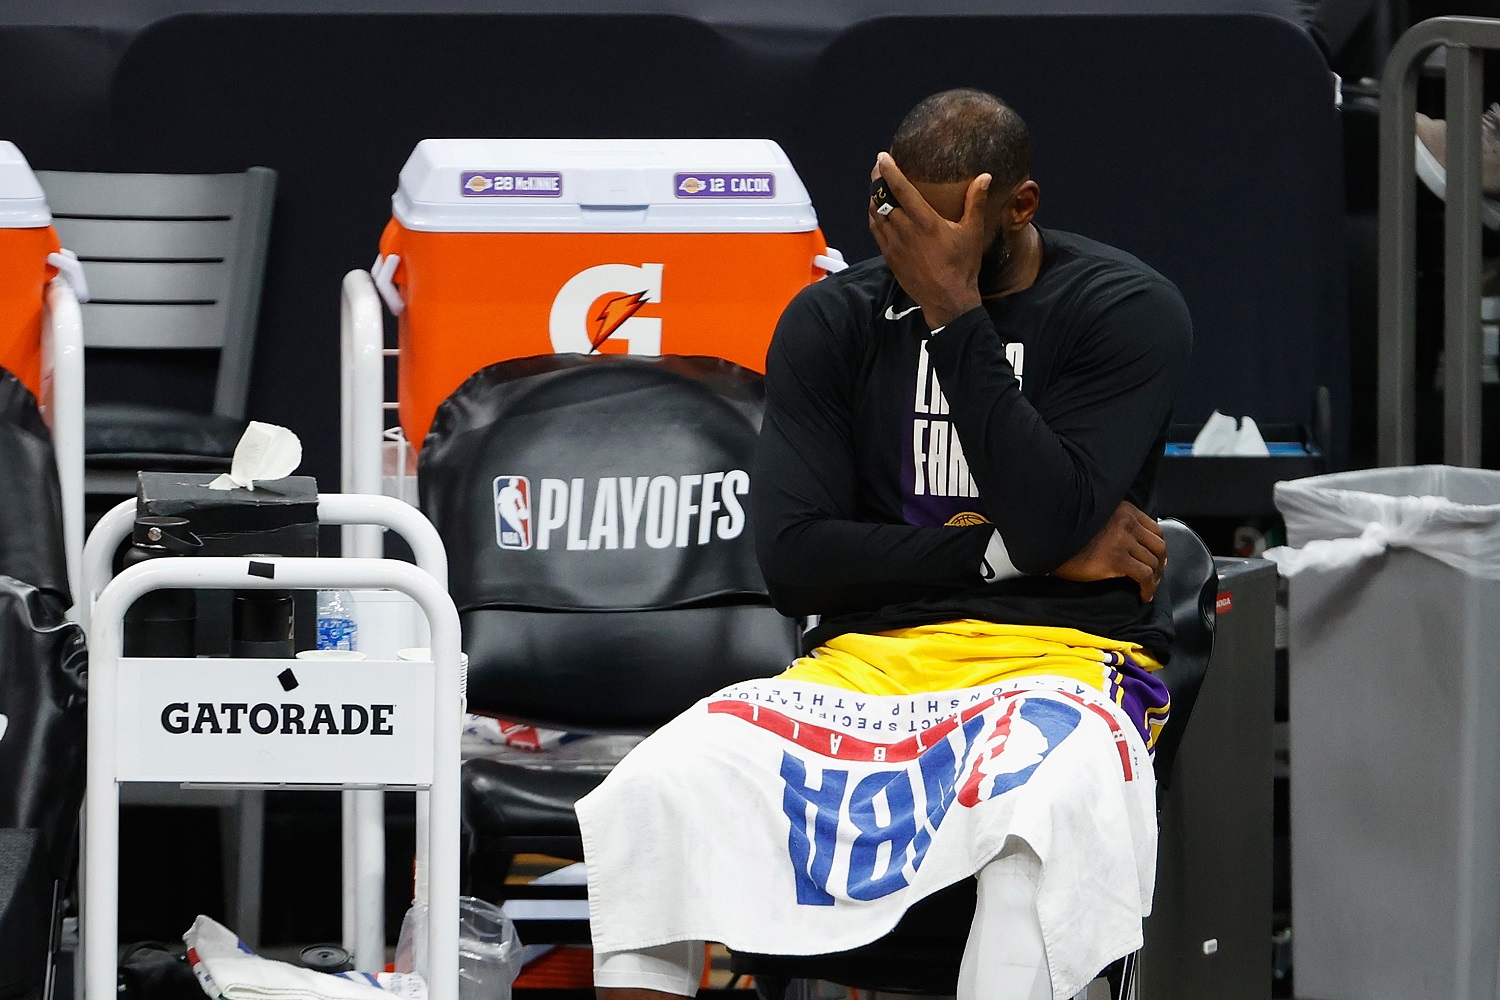 LeBron James reacts on the bench during the second half in Game 5 of the Western Conference quarterfinals against the Phoenix Suns Arena. | Christian Petersen/Getty Images